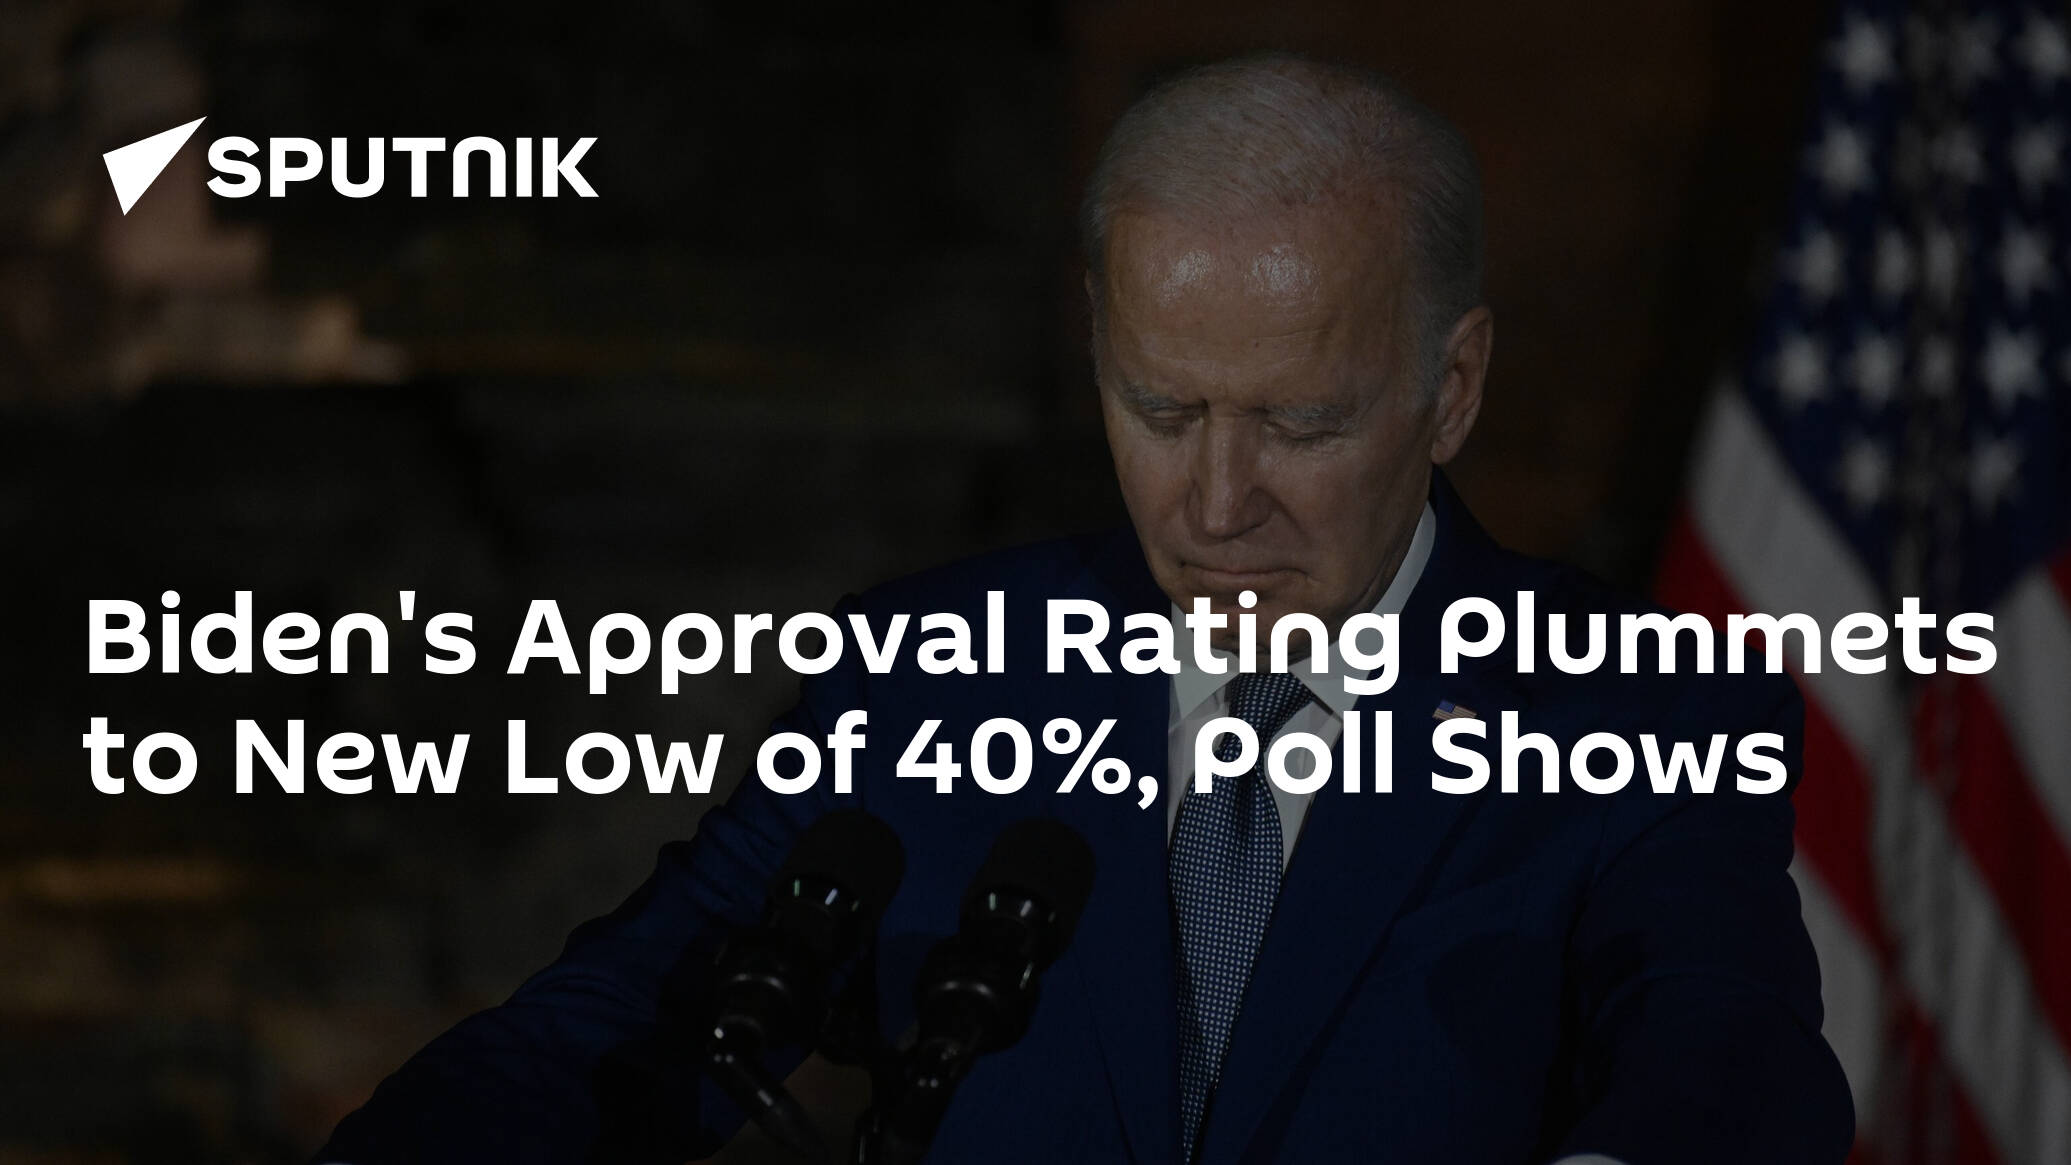 Biden's Approval Rating Reaches Record Low of 40%, Poll Shows